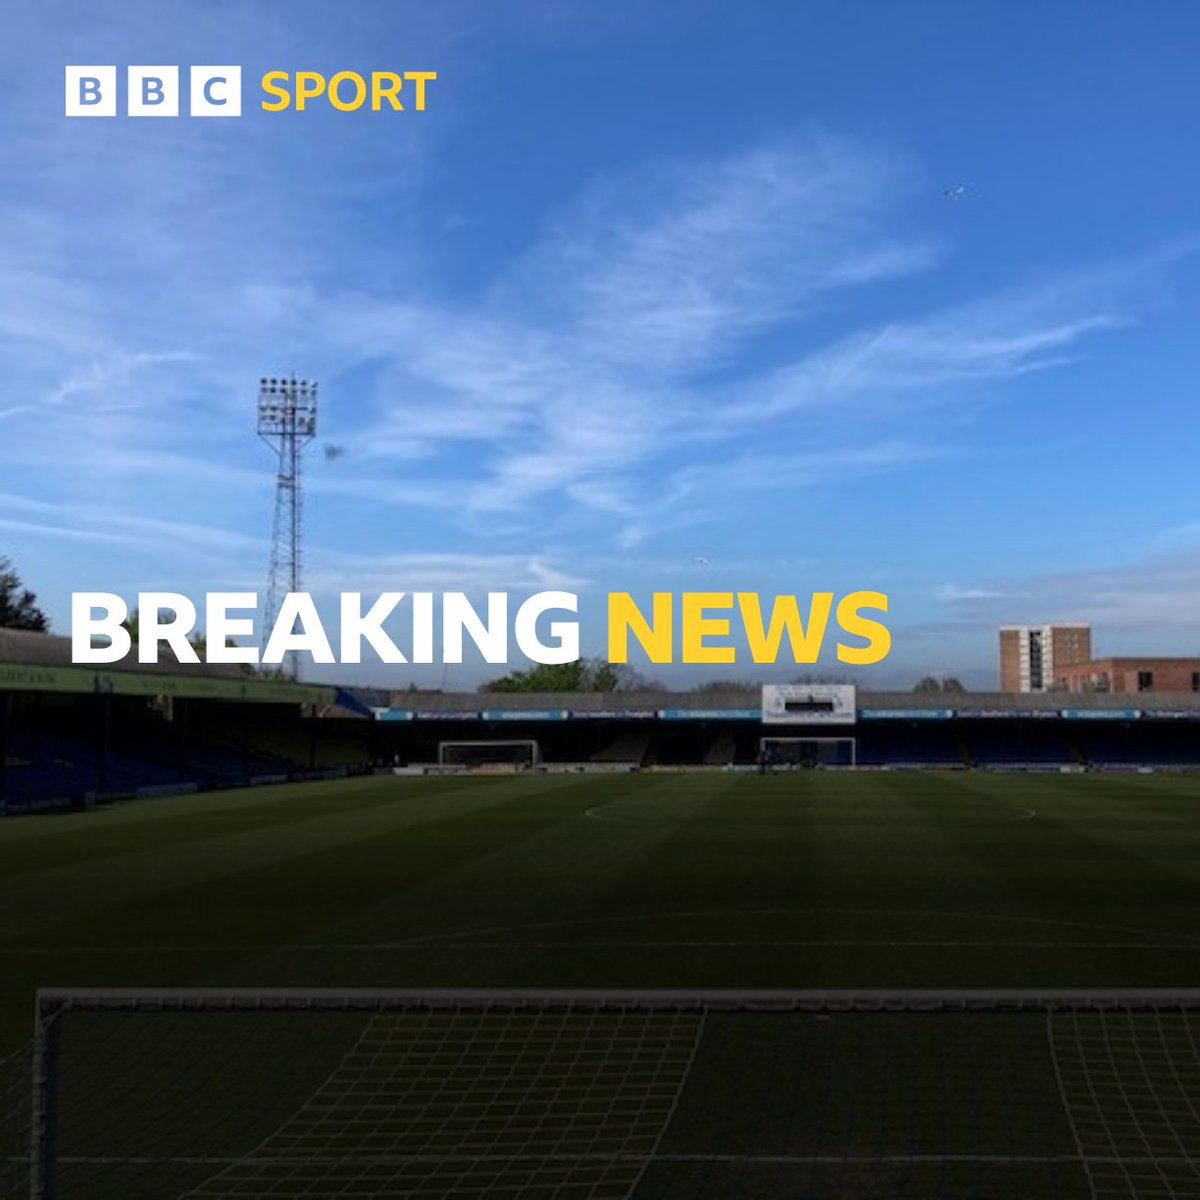 BREAKING: BBC Essex understands that Southend United's winding up hearing has been adjourned for six weeks. #Southend